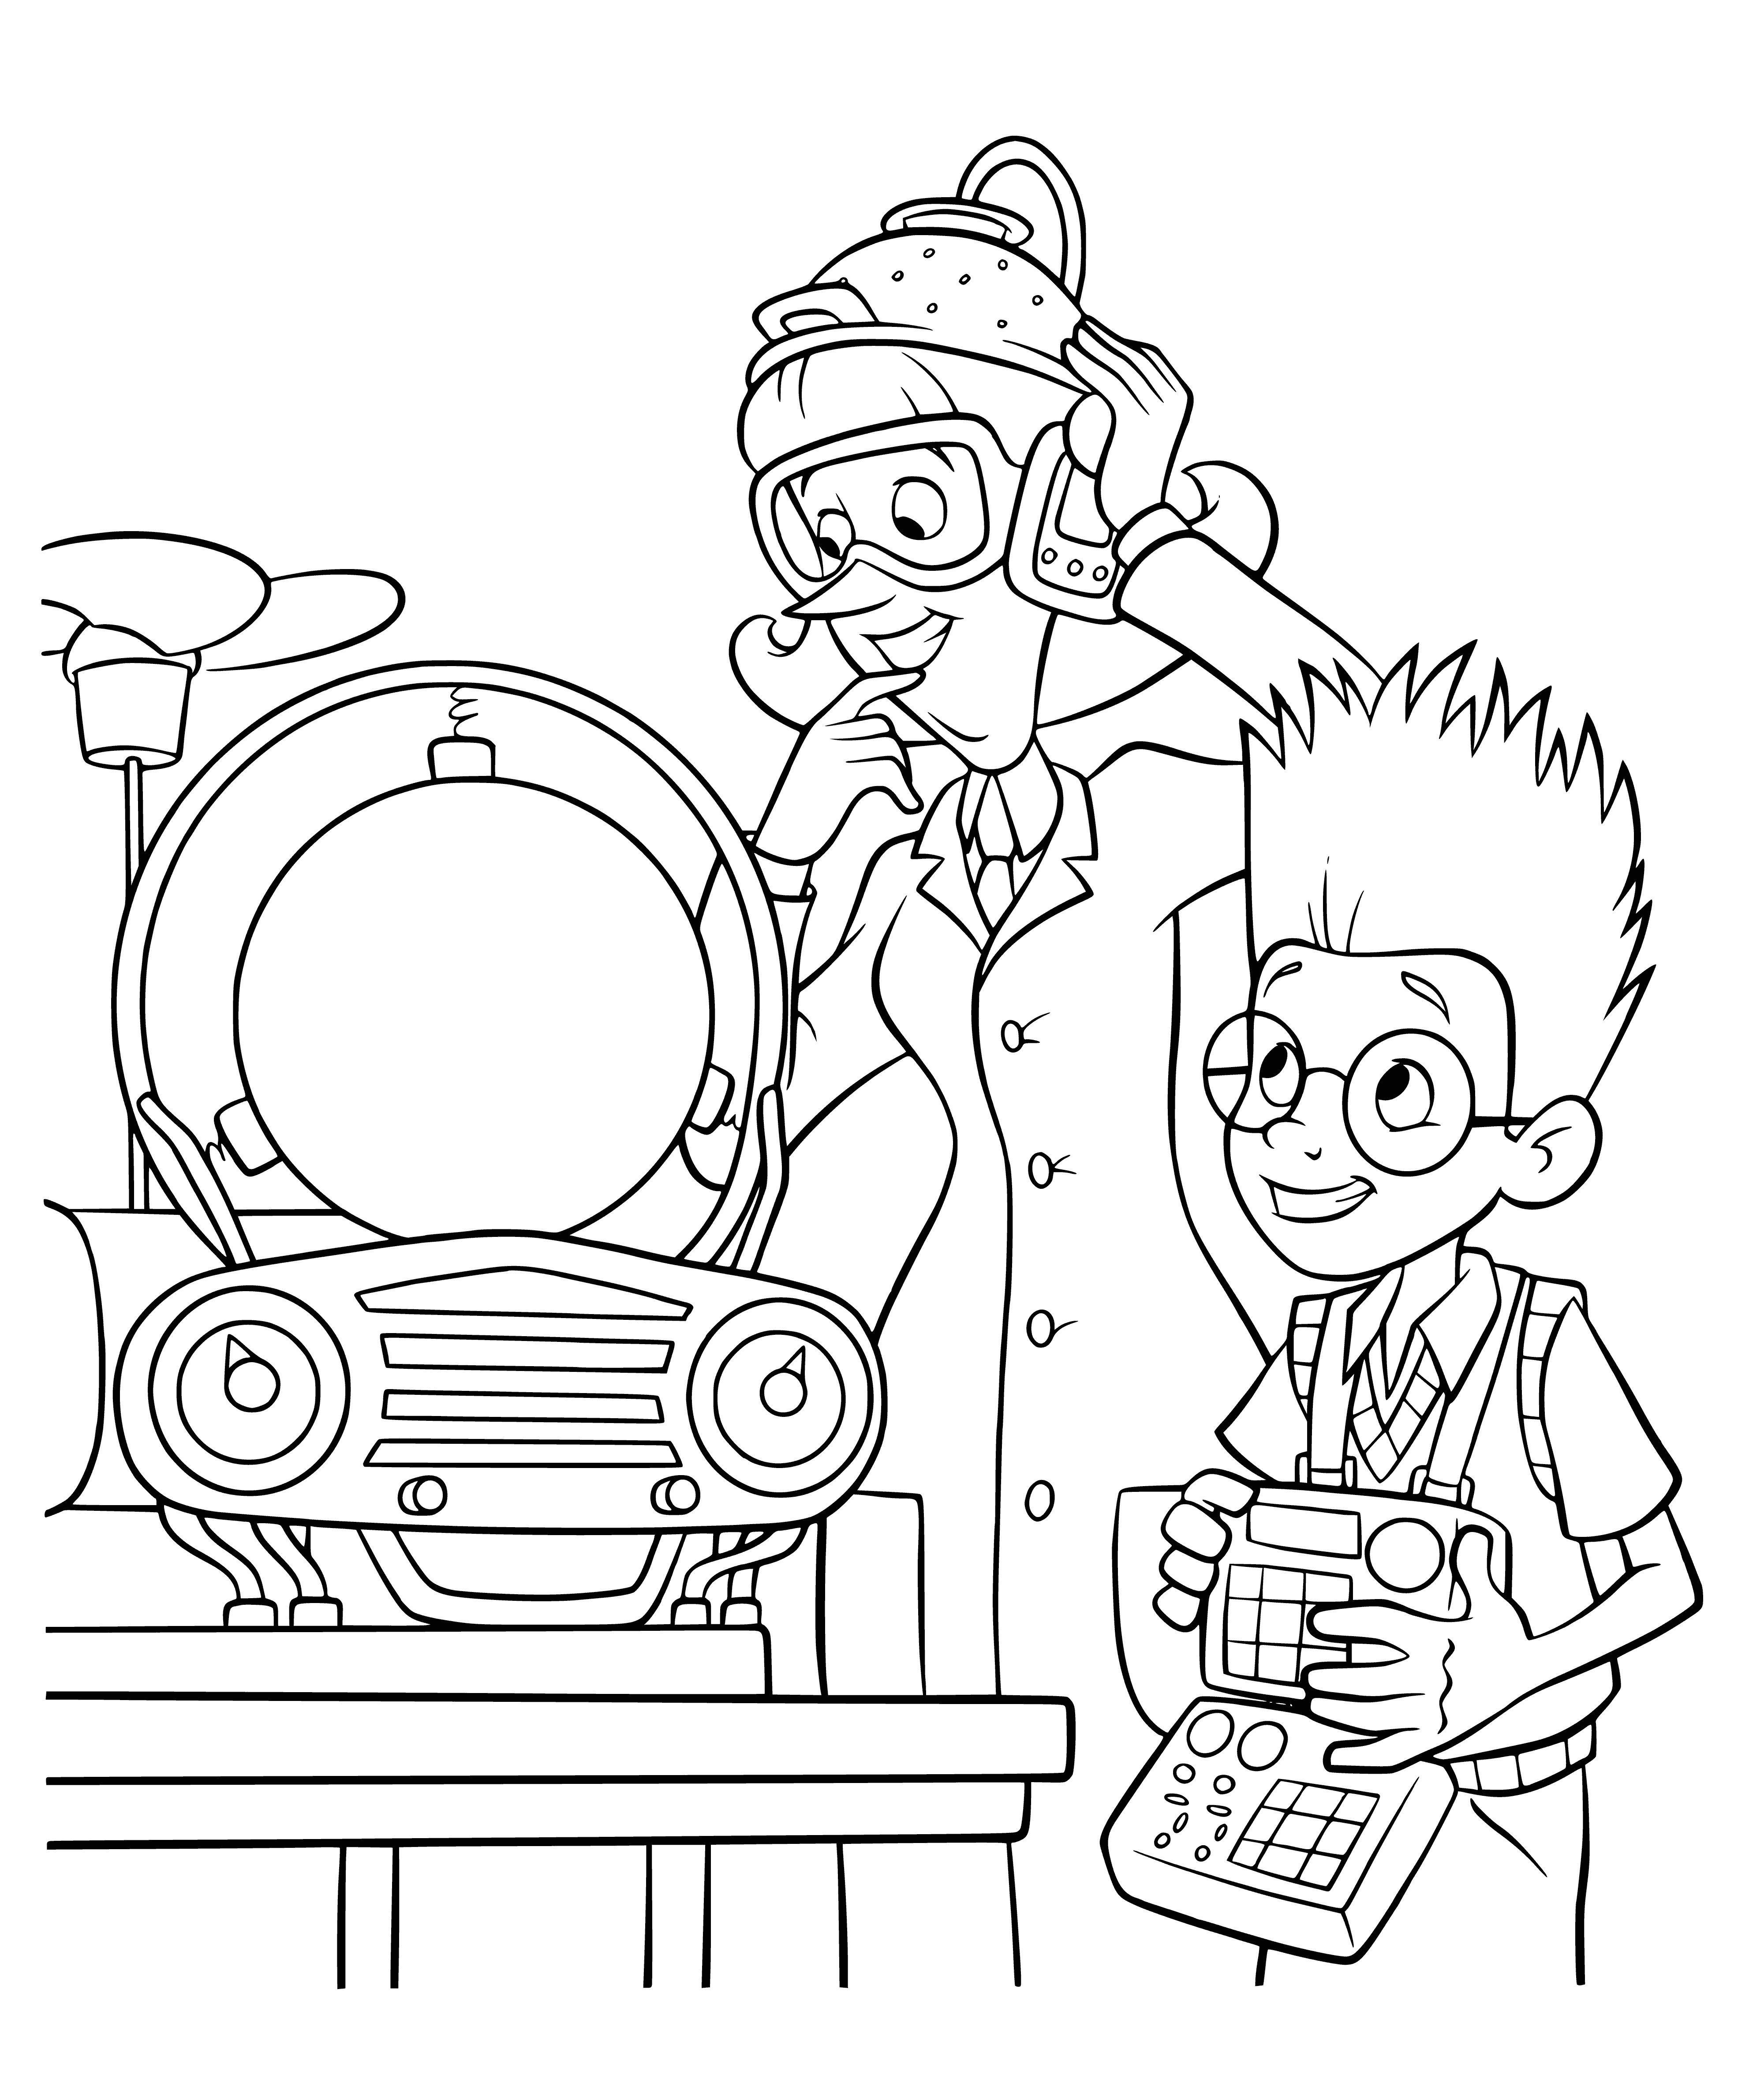 Memory Shaper coloring page